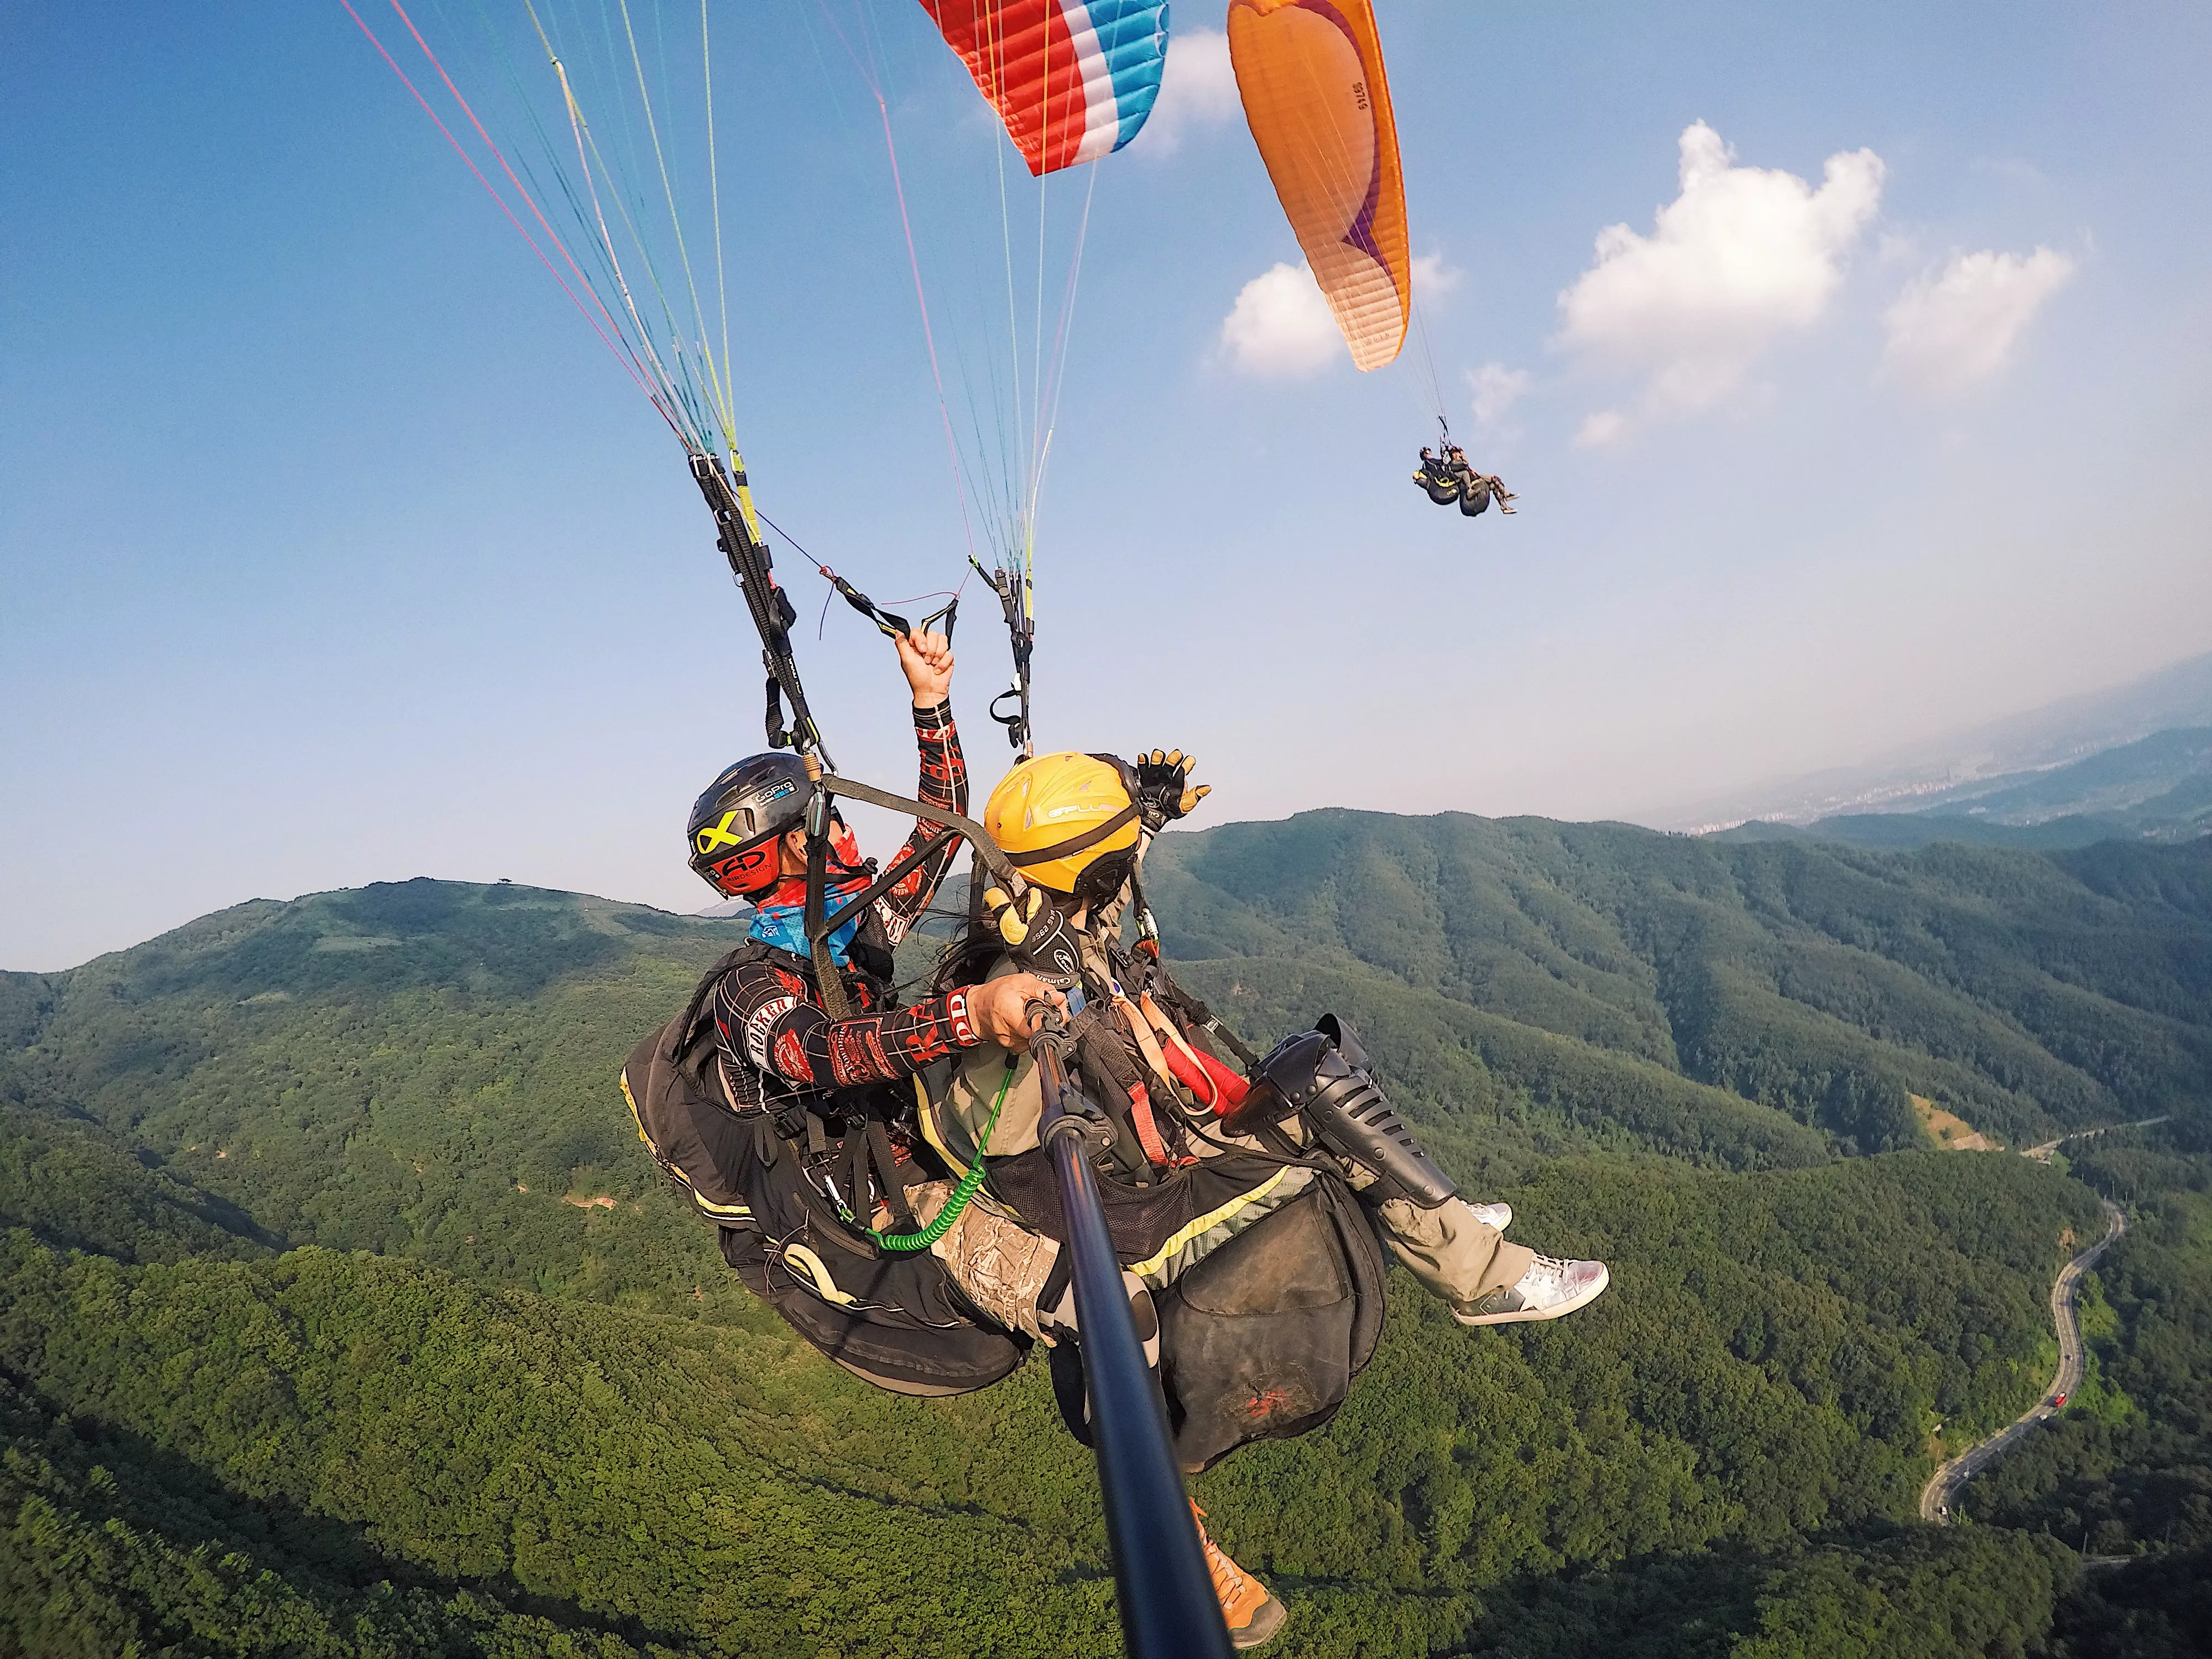 Danyang Paragliding in South Korea, East Asia | Paragliding - Rated 4.3